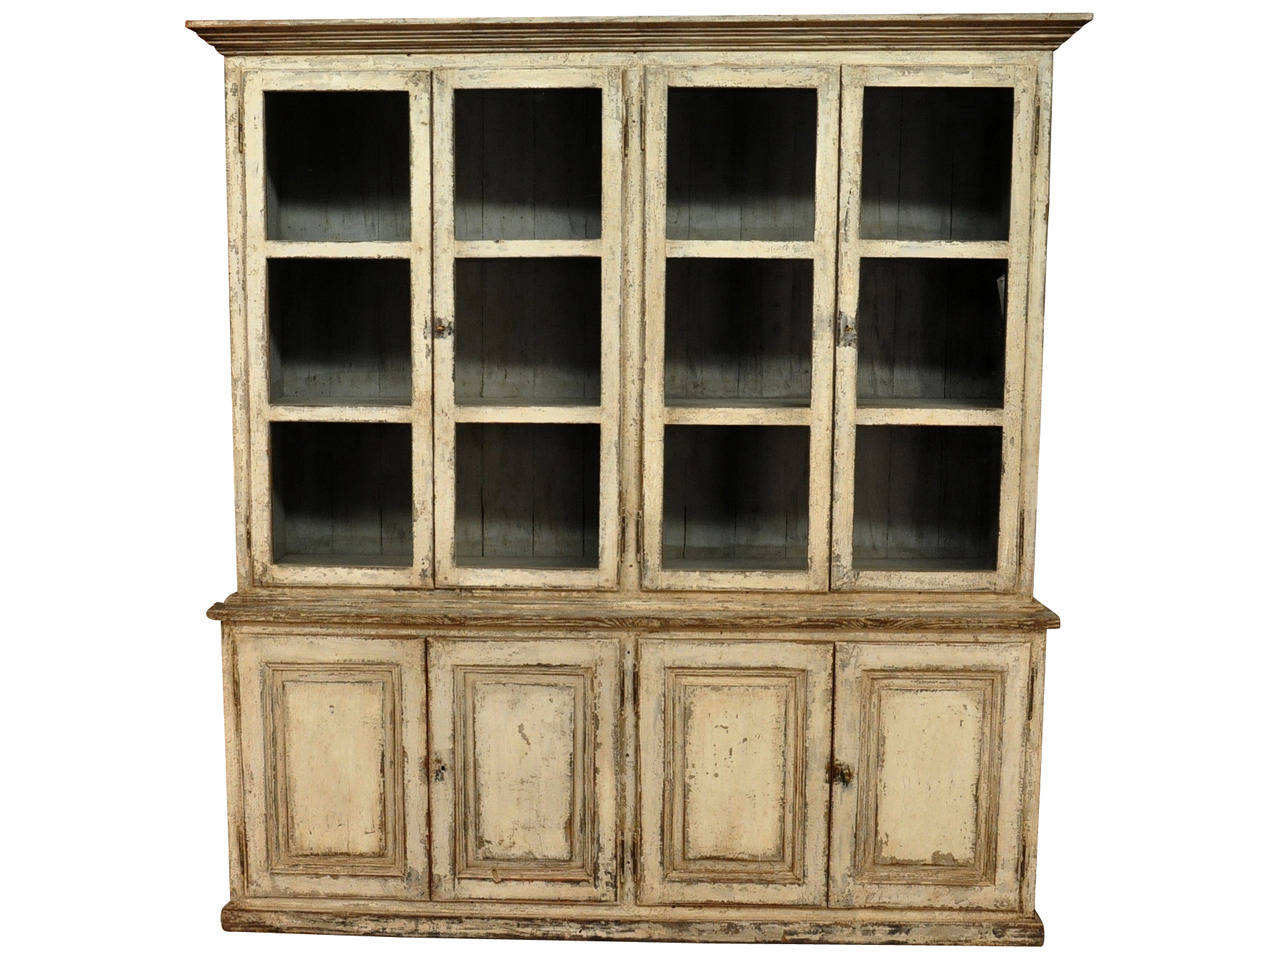 Portuguese Pair of Early 19th Century Bookcases in Solid Painted Wood from Portugal